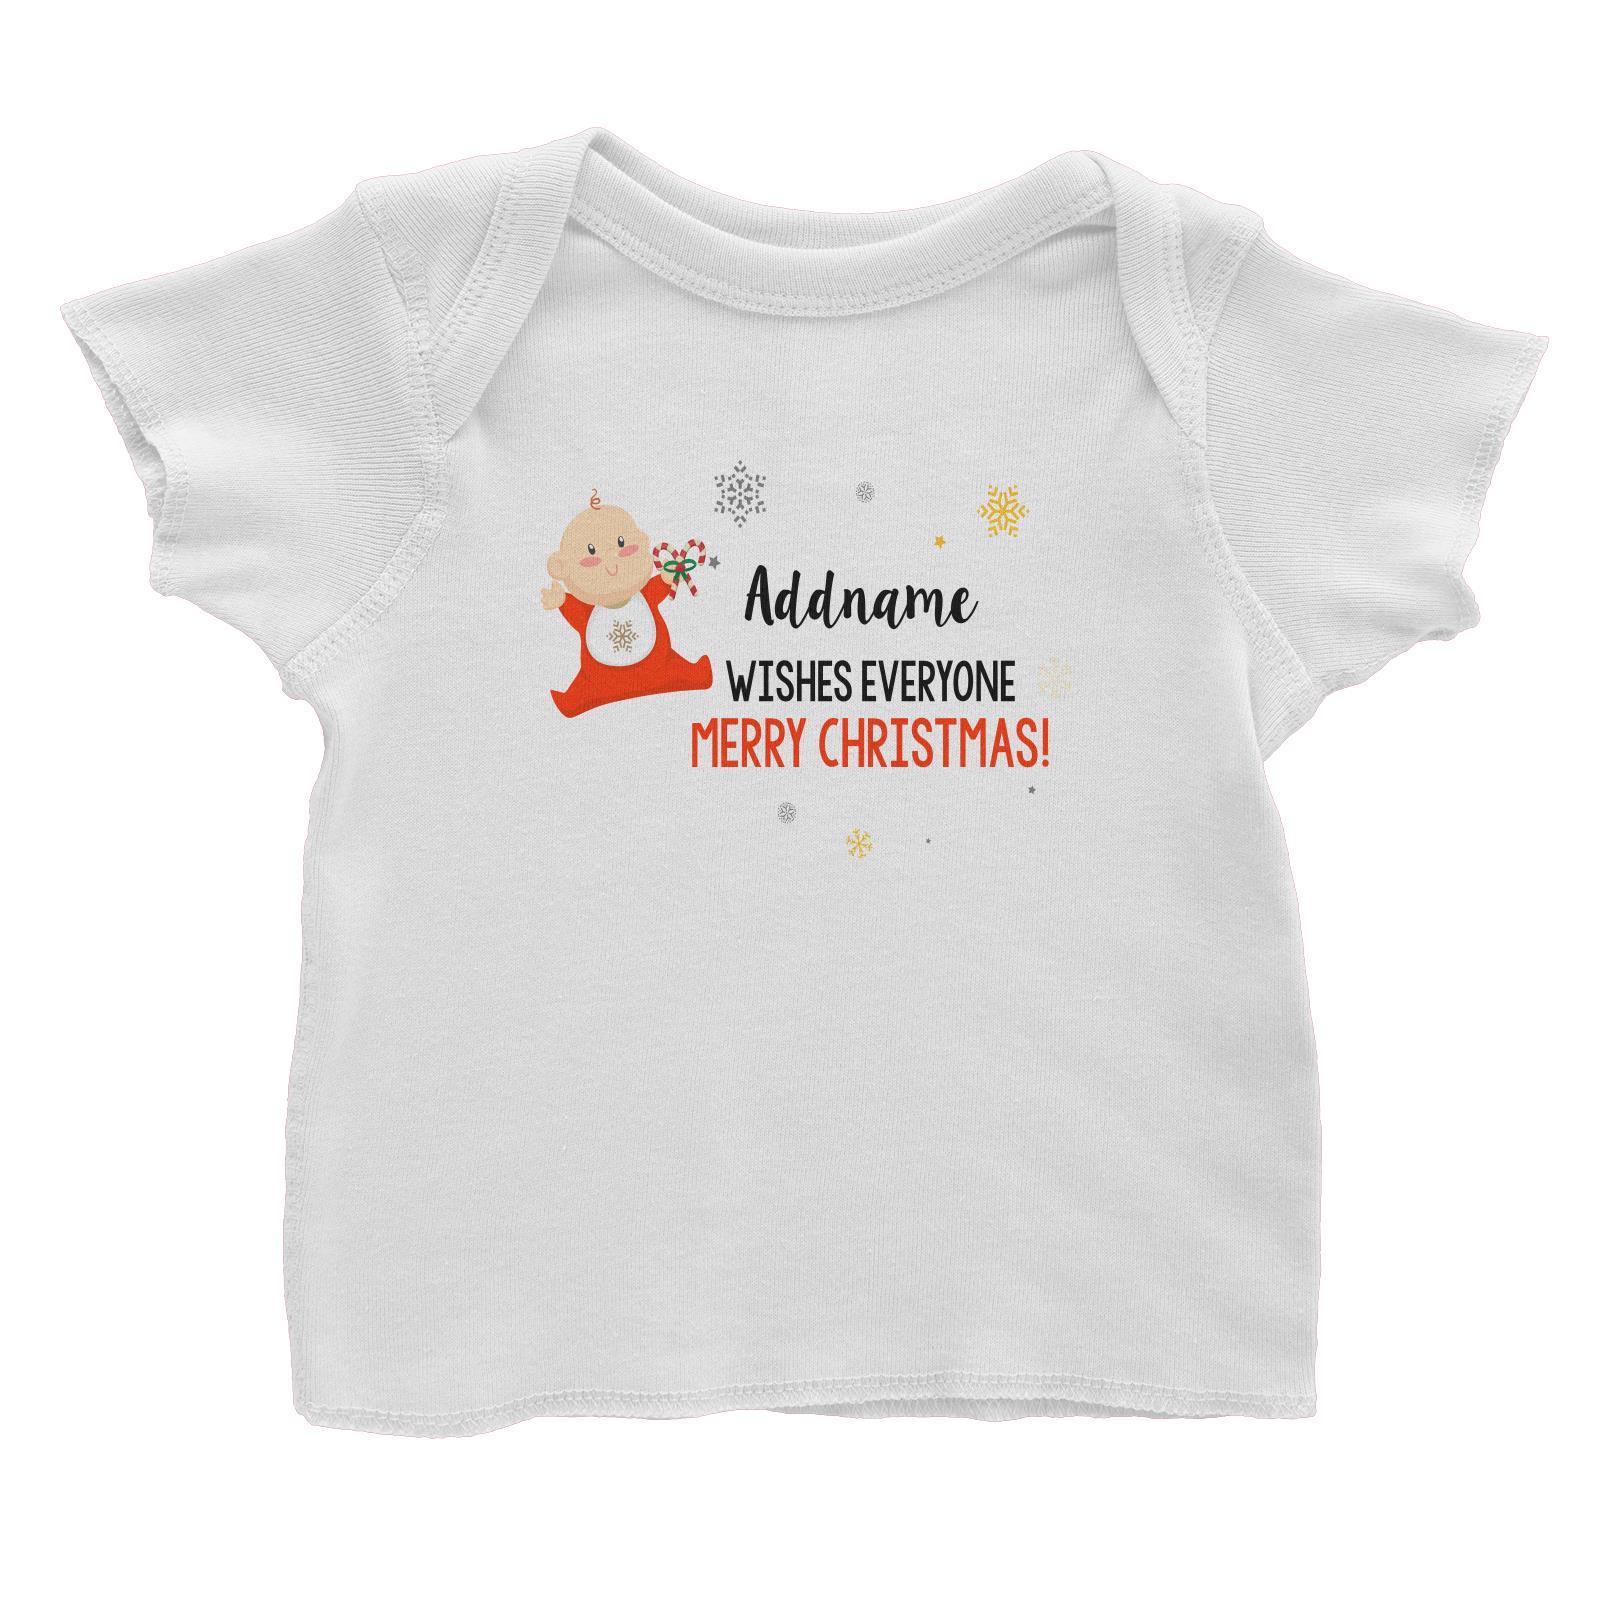 Cute Elf Baby Wishes Everyone Merry Christmas Addname Baby T-Shirt  Matching Family Personalizable Designs